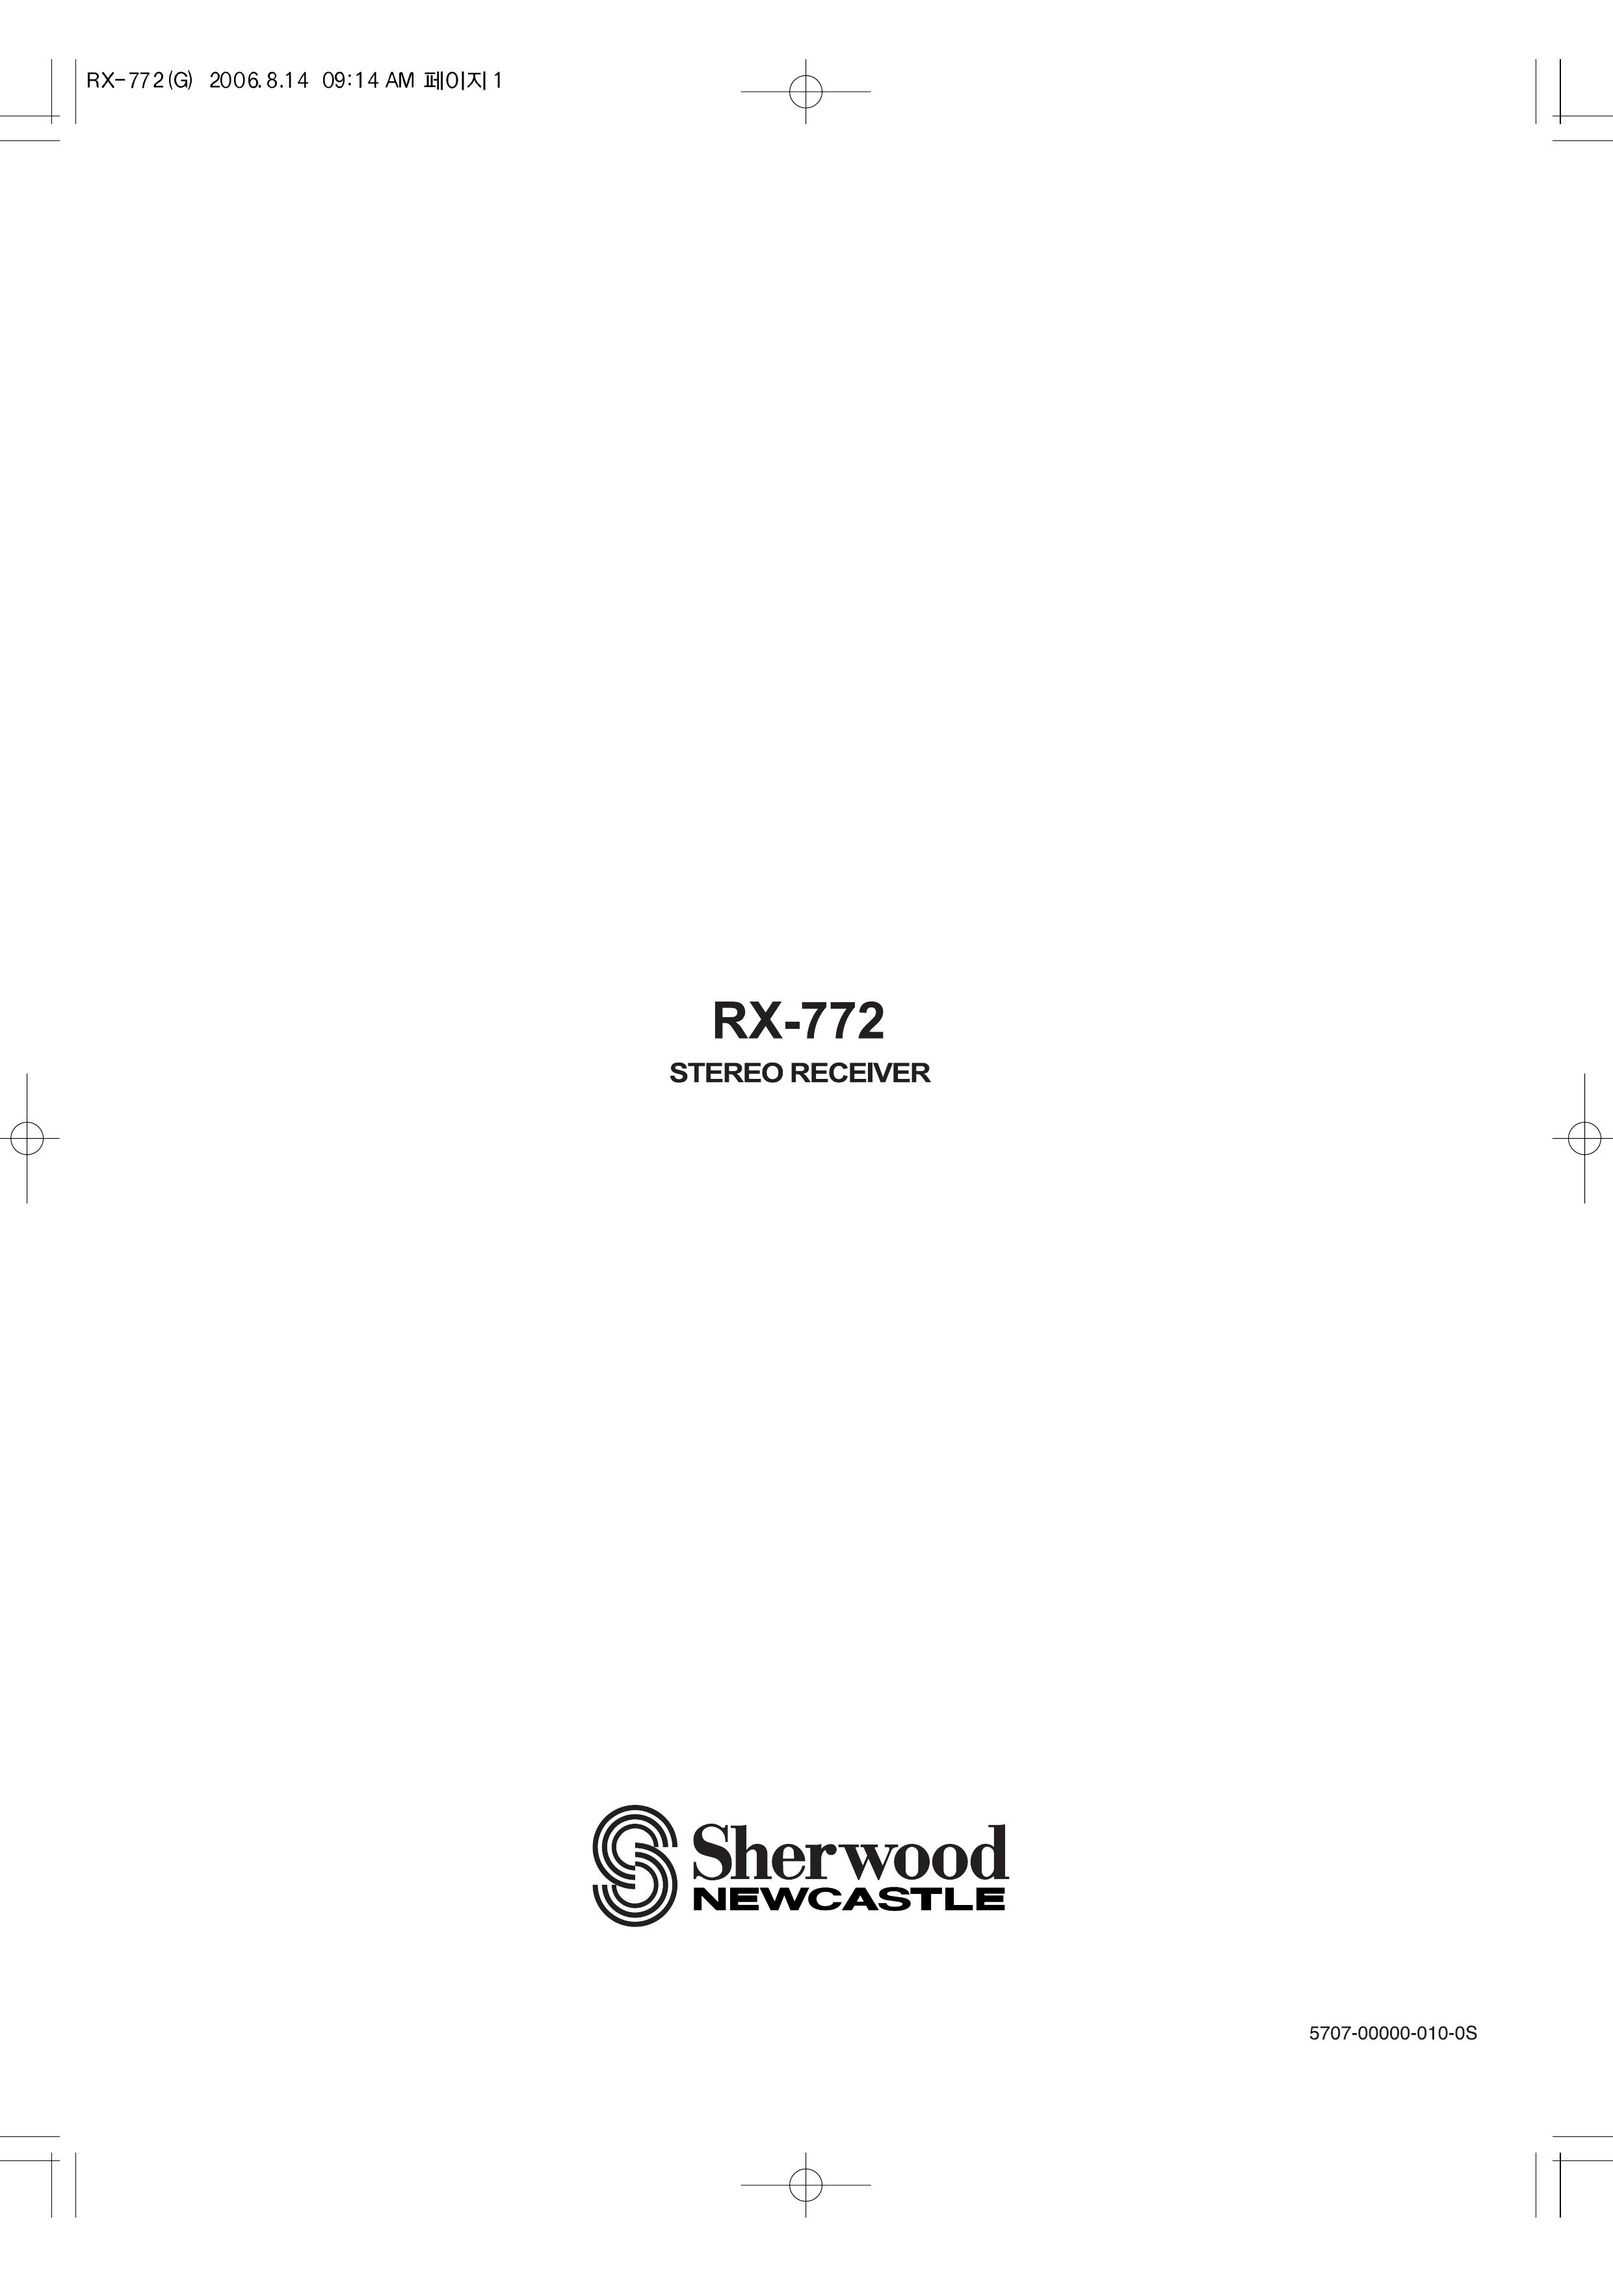 Sherwood RX-772 Stereo Receiver User Manual